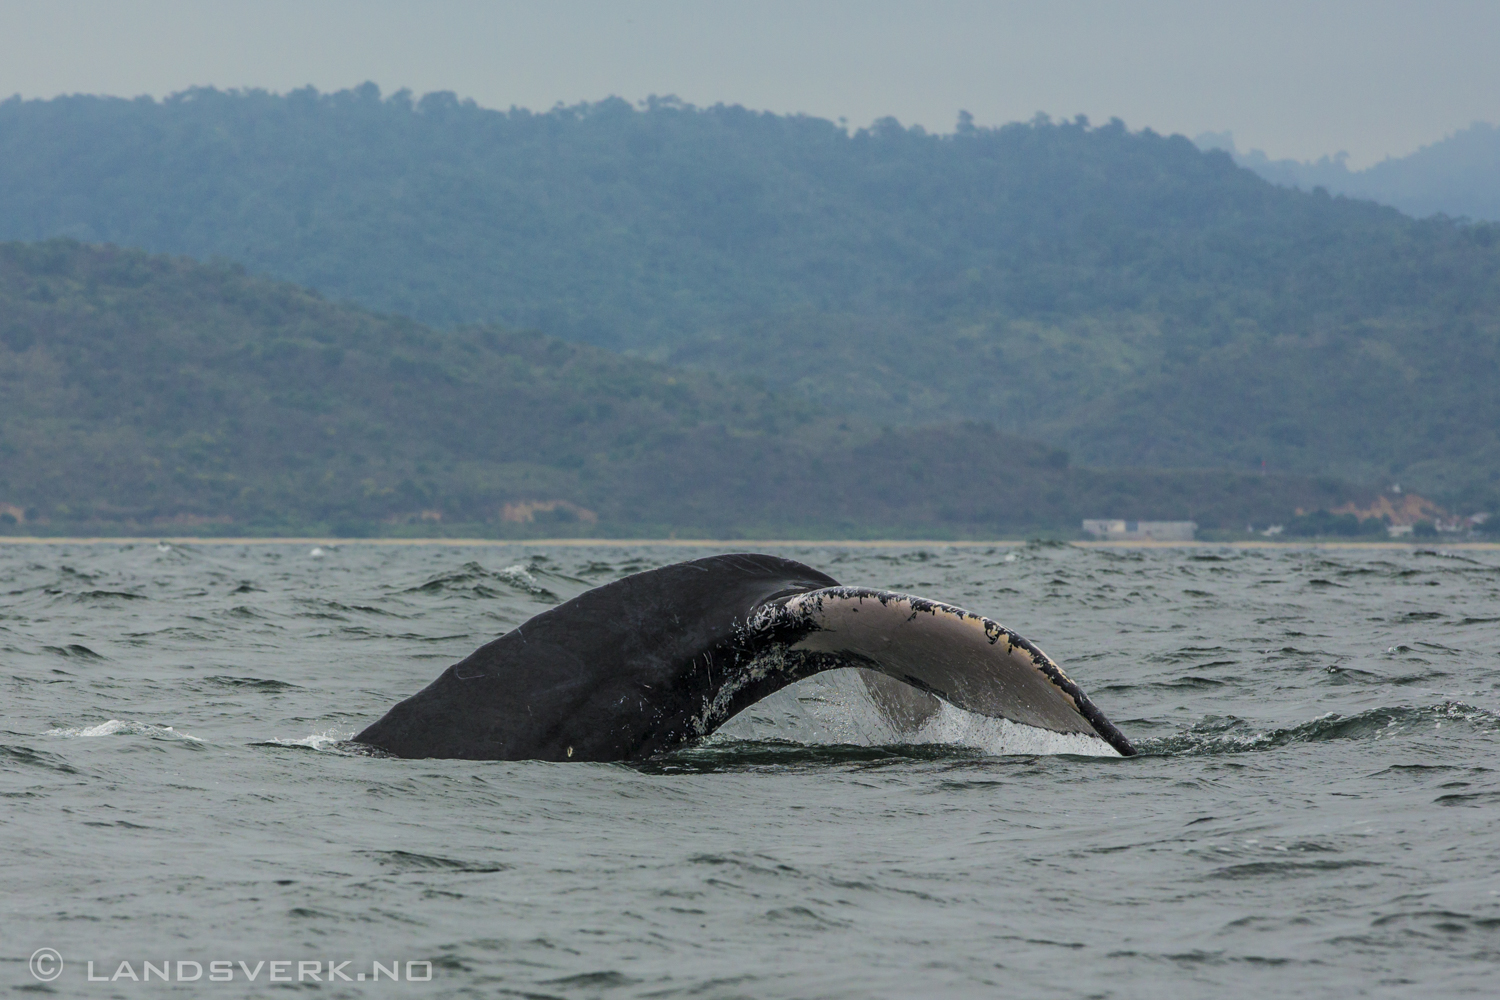 Whale! But didn't get it to jump. Puerto Lopez, Ecuador. 

(Canon EOS 5D Mark III / Canon EF 70-200mm f/2.8 L IS II USM)